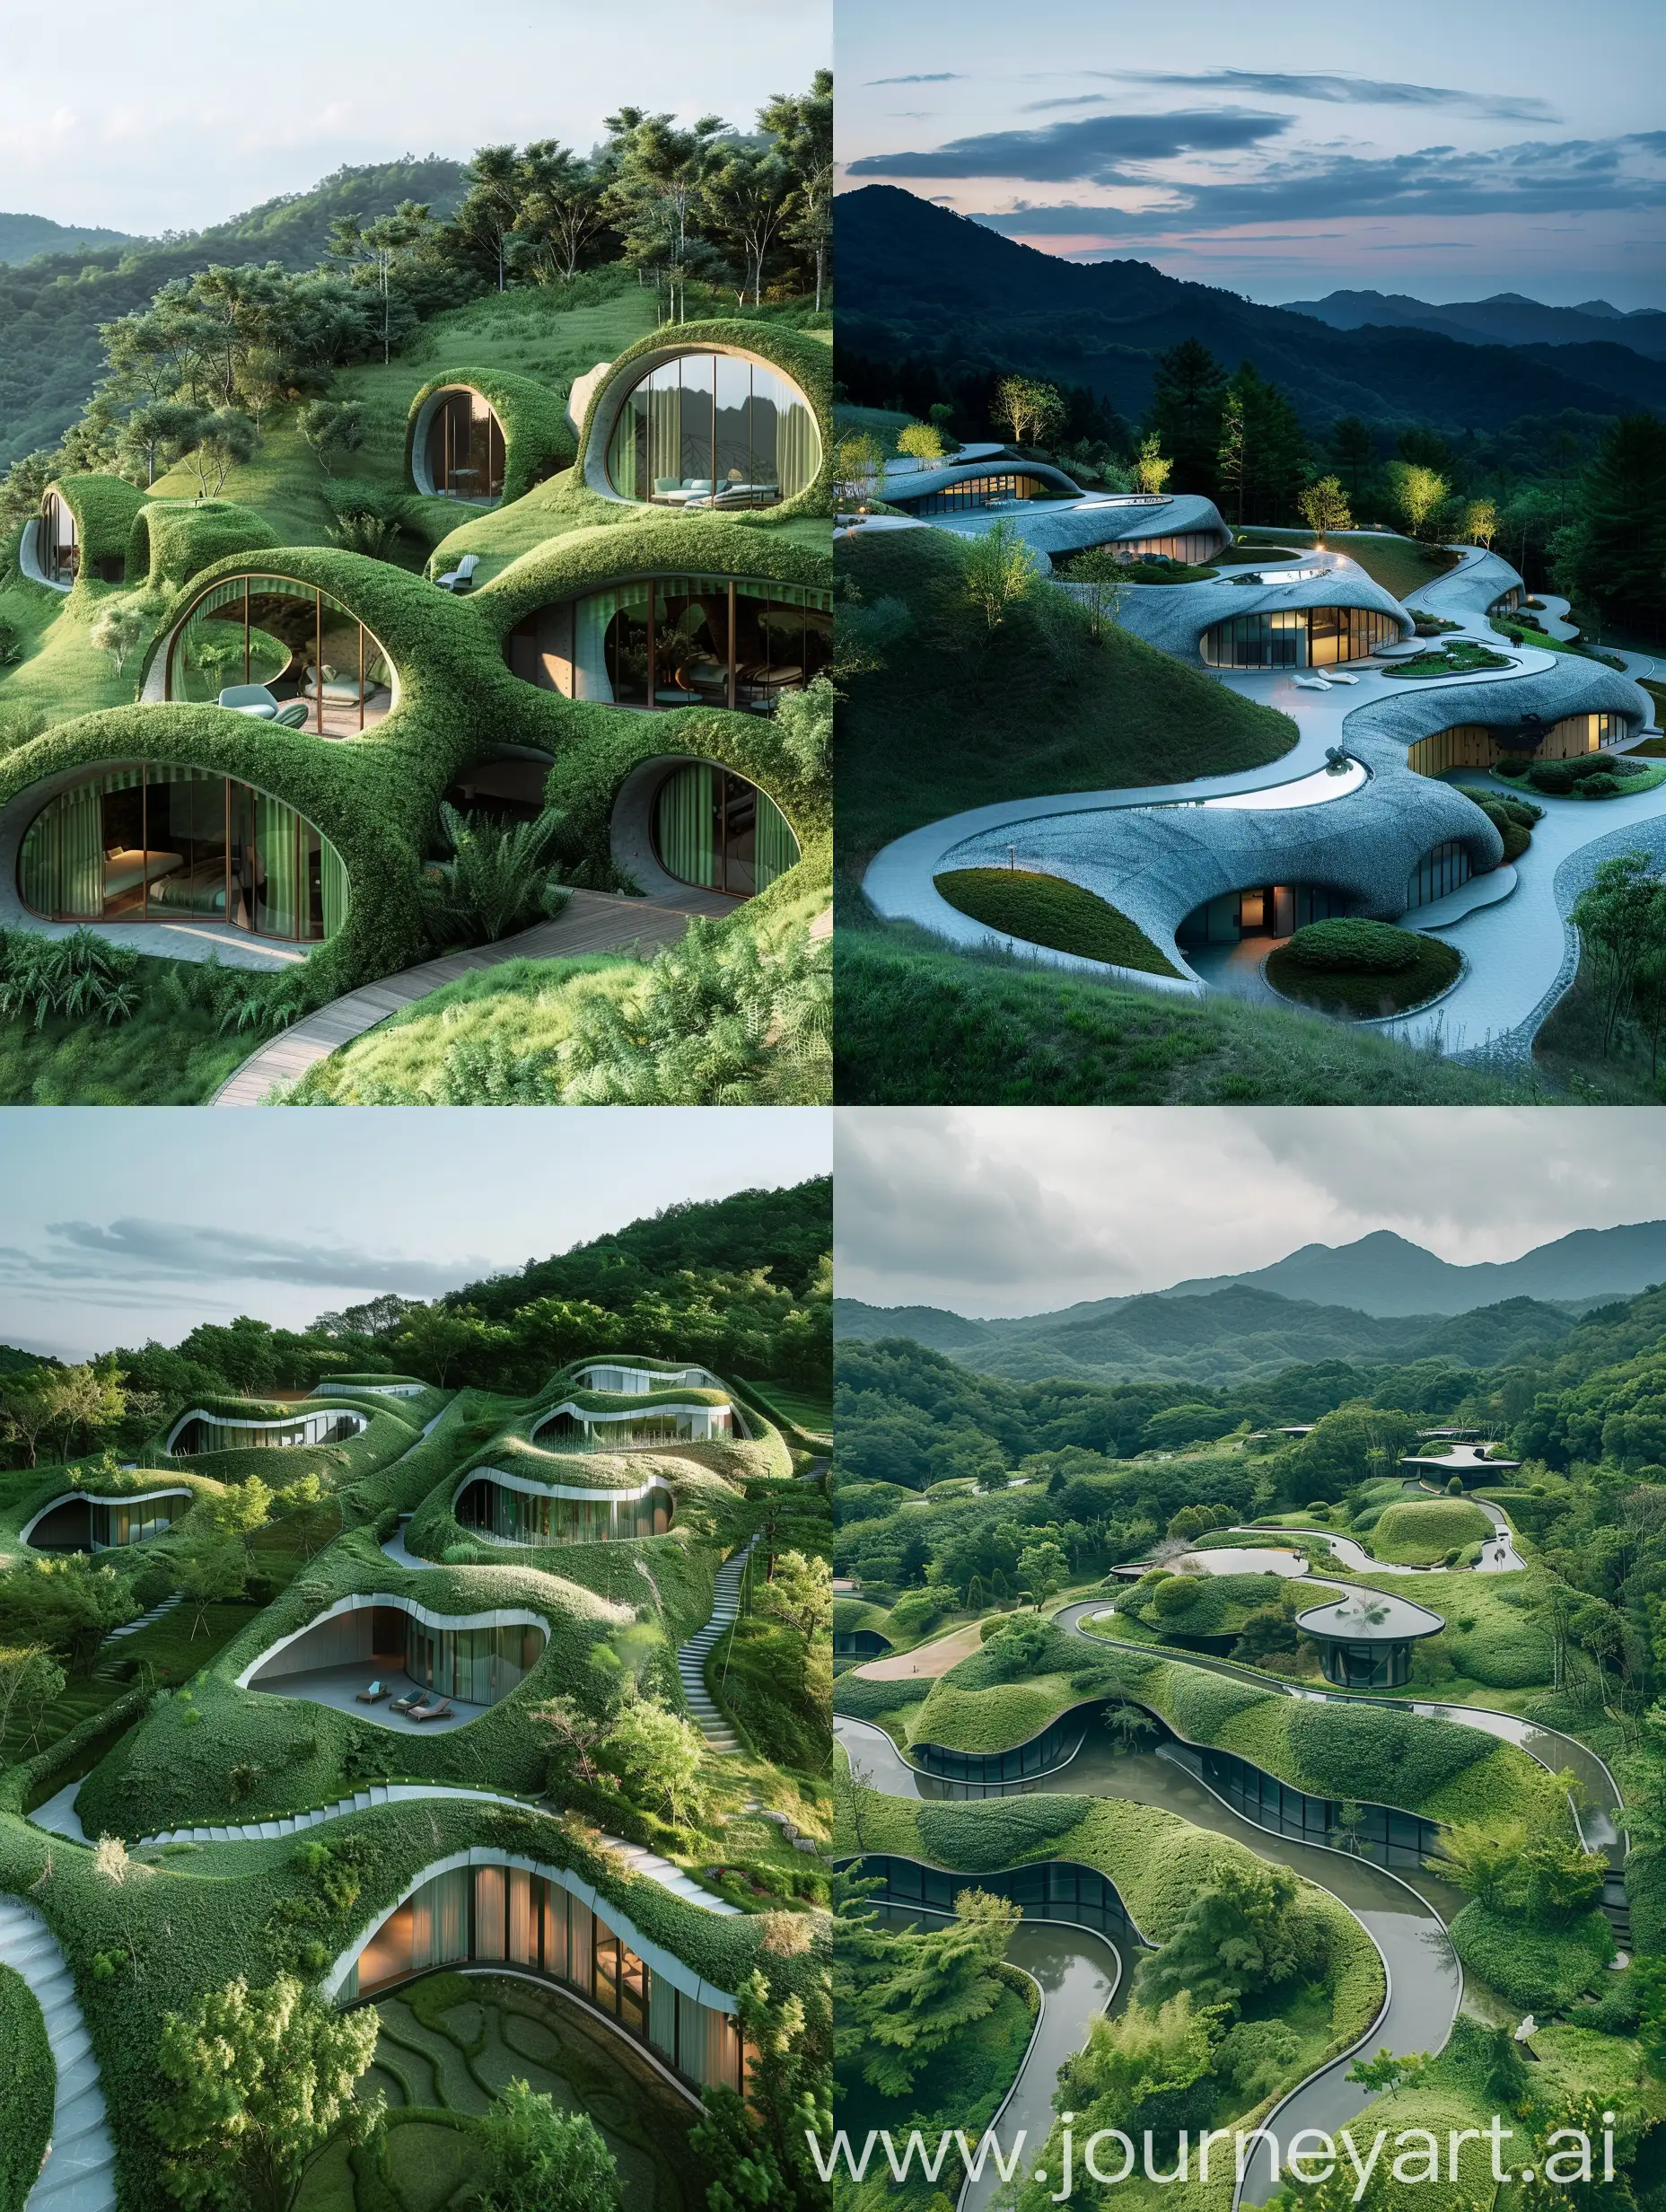 organic resort embed into a series of hills, designed by Ando Tadao, architectural photography, style of archillect, futurism, modernist architecture
